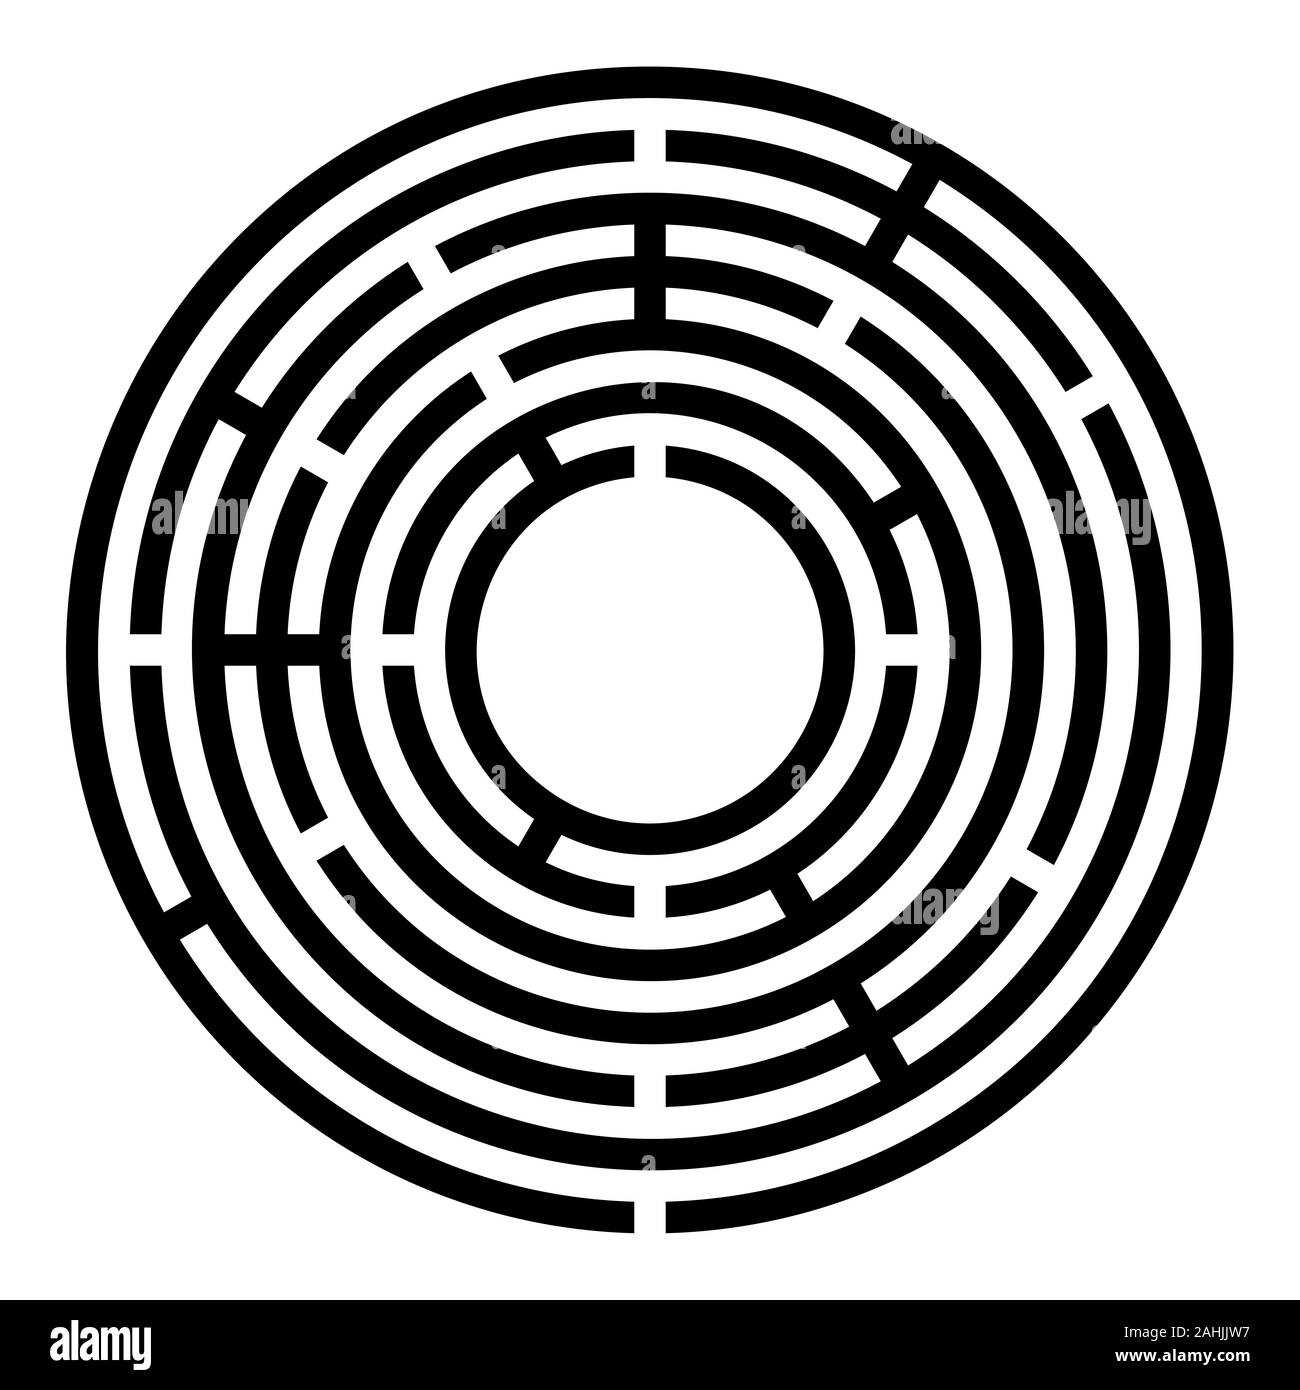 Small black circular maze. Radial labyrinth. Find a route to the centre. Print out and follow the path by a pencil or fingertip. Collection of paths. Stock Photo